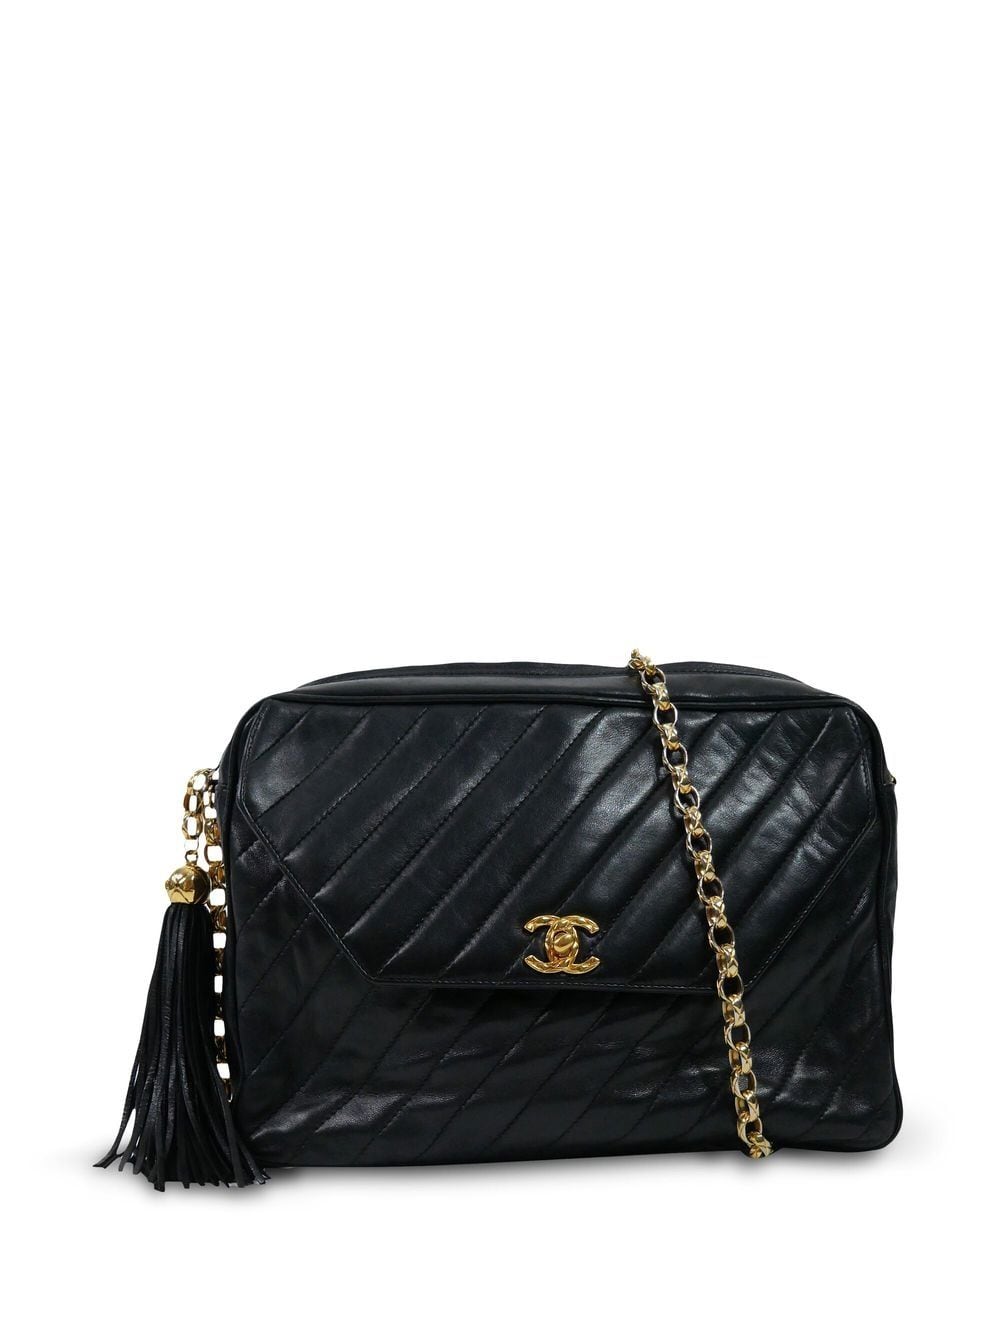 Pre-owned Chanel 1991-1994 Cc Diamond-quilted Tassel Crossbody Bag In Black